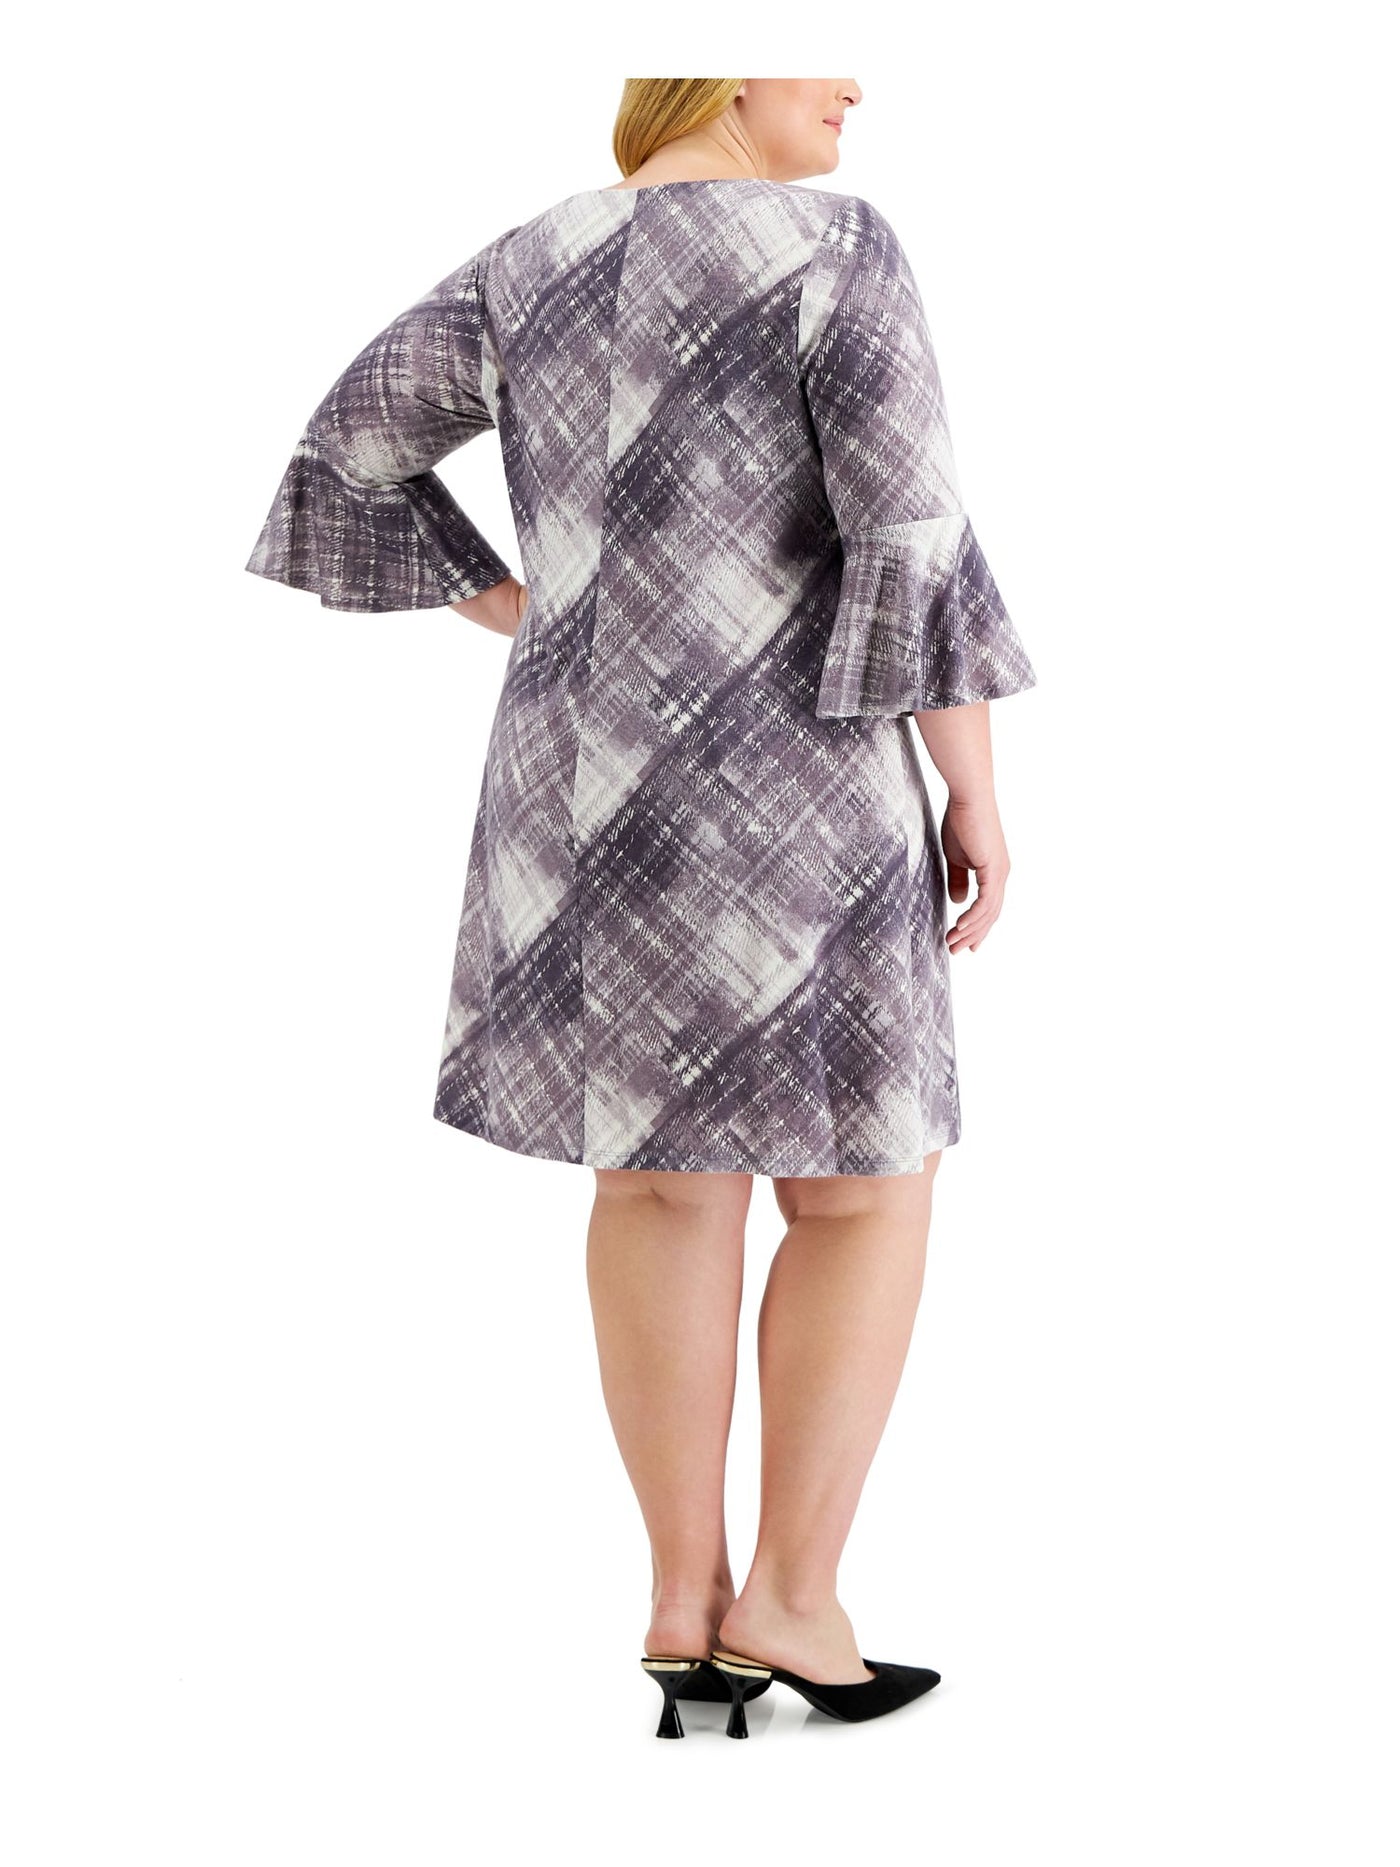 CONNECTED APPAREL Womens Purple Stretch Plaid Bell Sleeve Round Neck Above The Knee Wear To Work Fit + Flare Dress Plus 24W